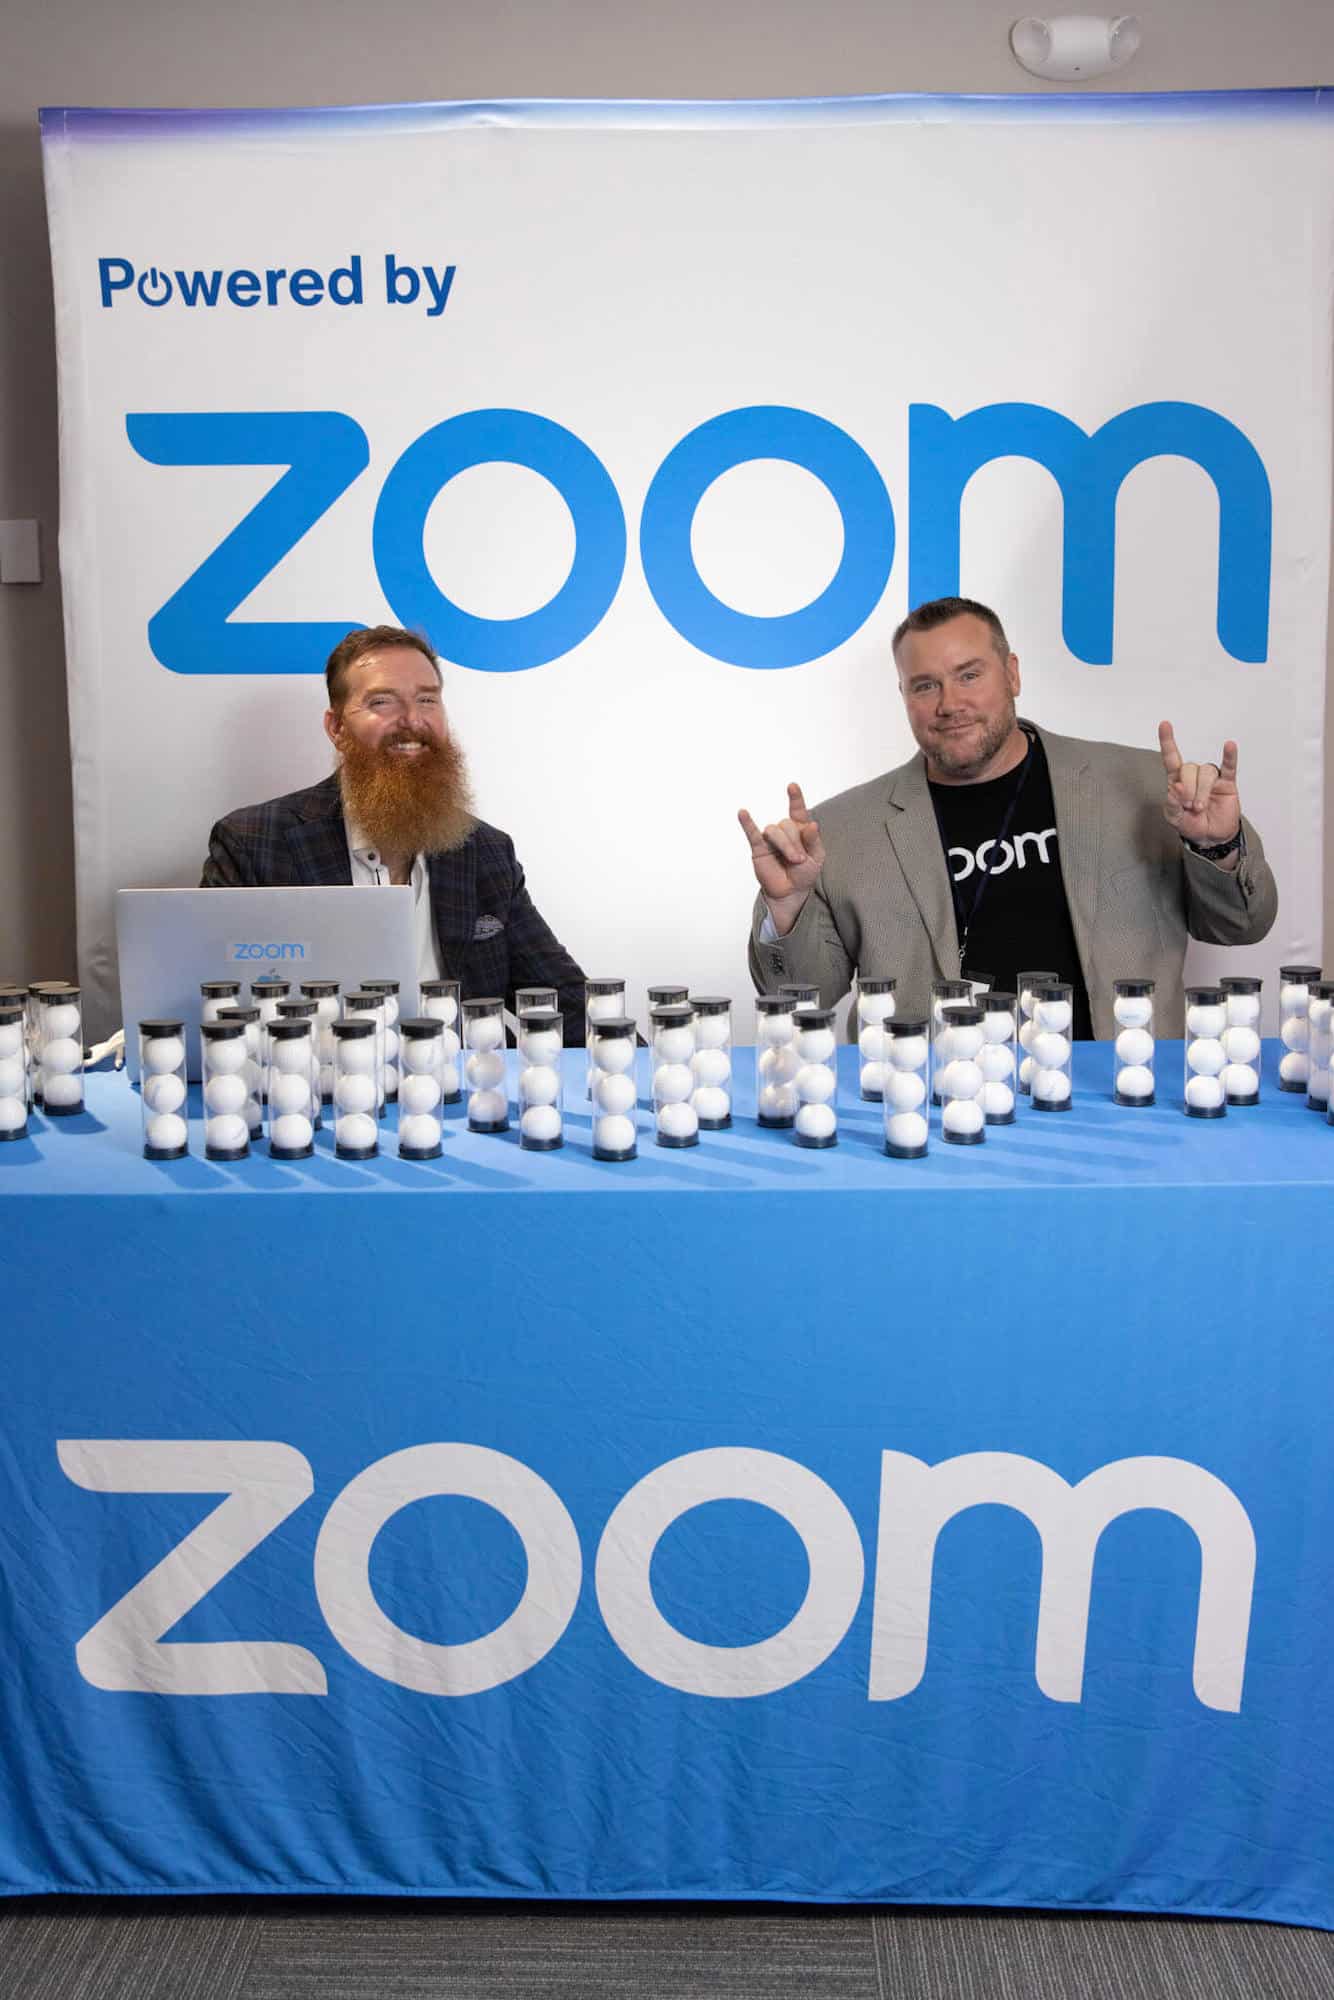 Two people sit at a trade show table covered in a blue cloth with white writing. The booth backdrop is white with blue writing that says "Powered by Zoom."